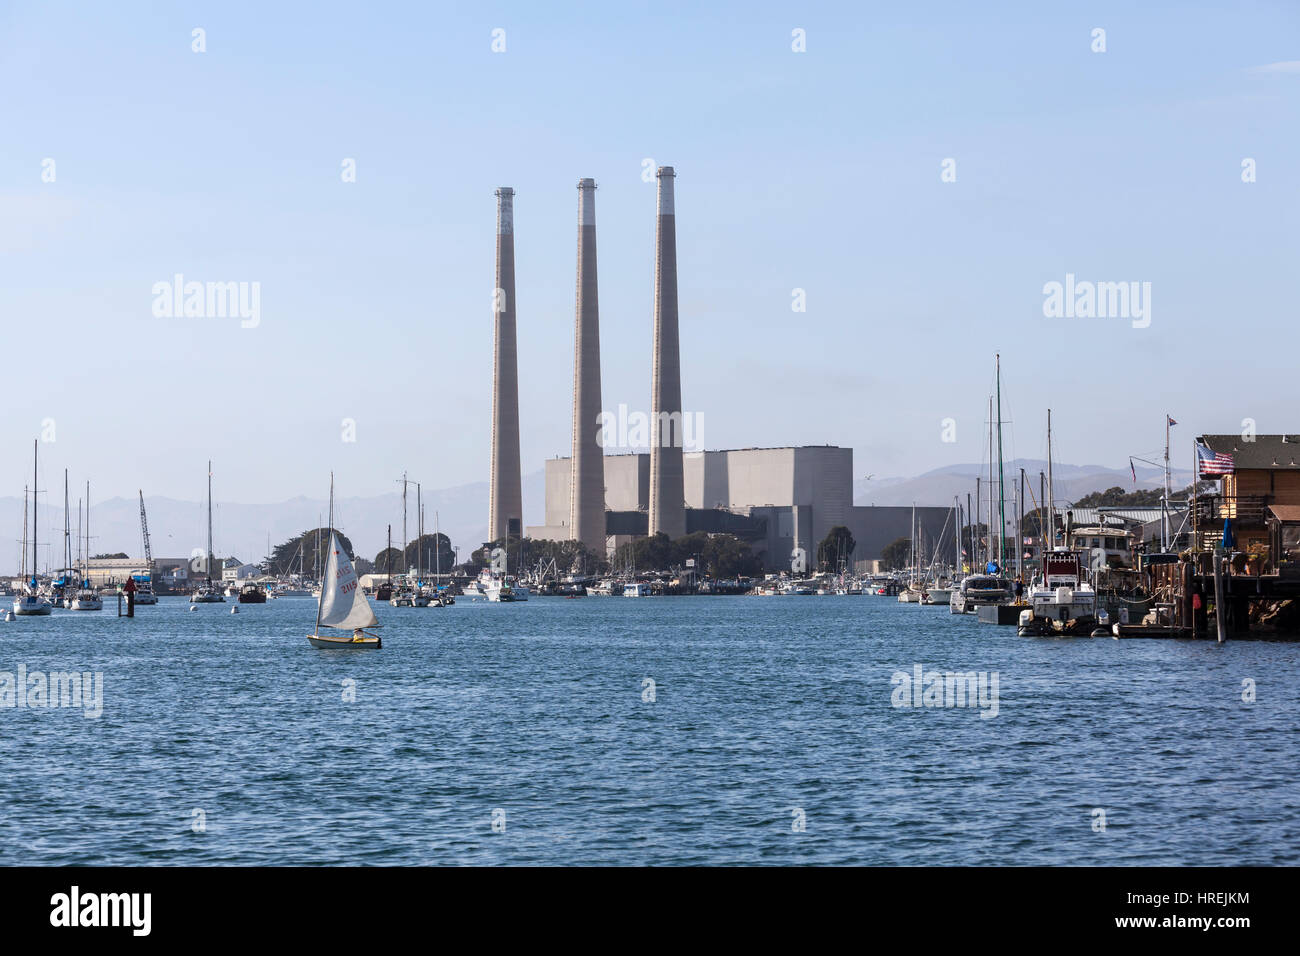 Morro Bay, California, USA - July 6, 2014:  Recreational boats moored below towering 450 foot smokestacks of the recently closed power plant in Morro  Stock Photo